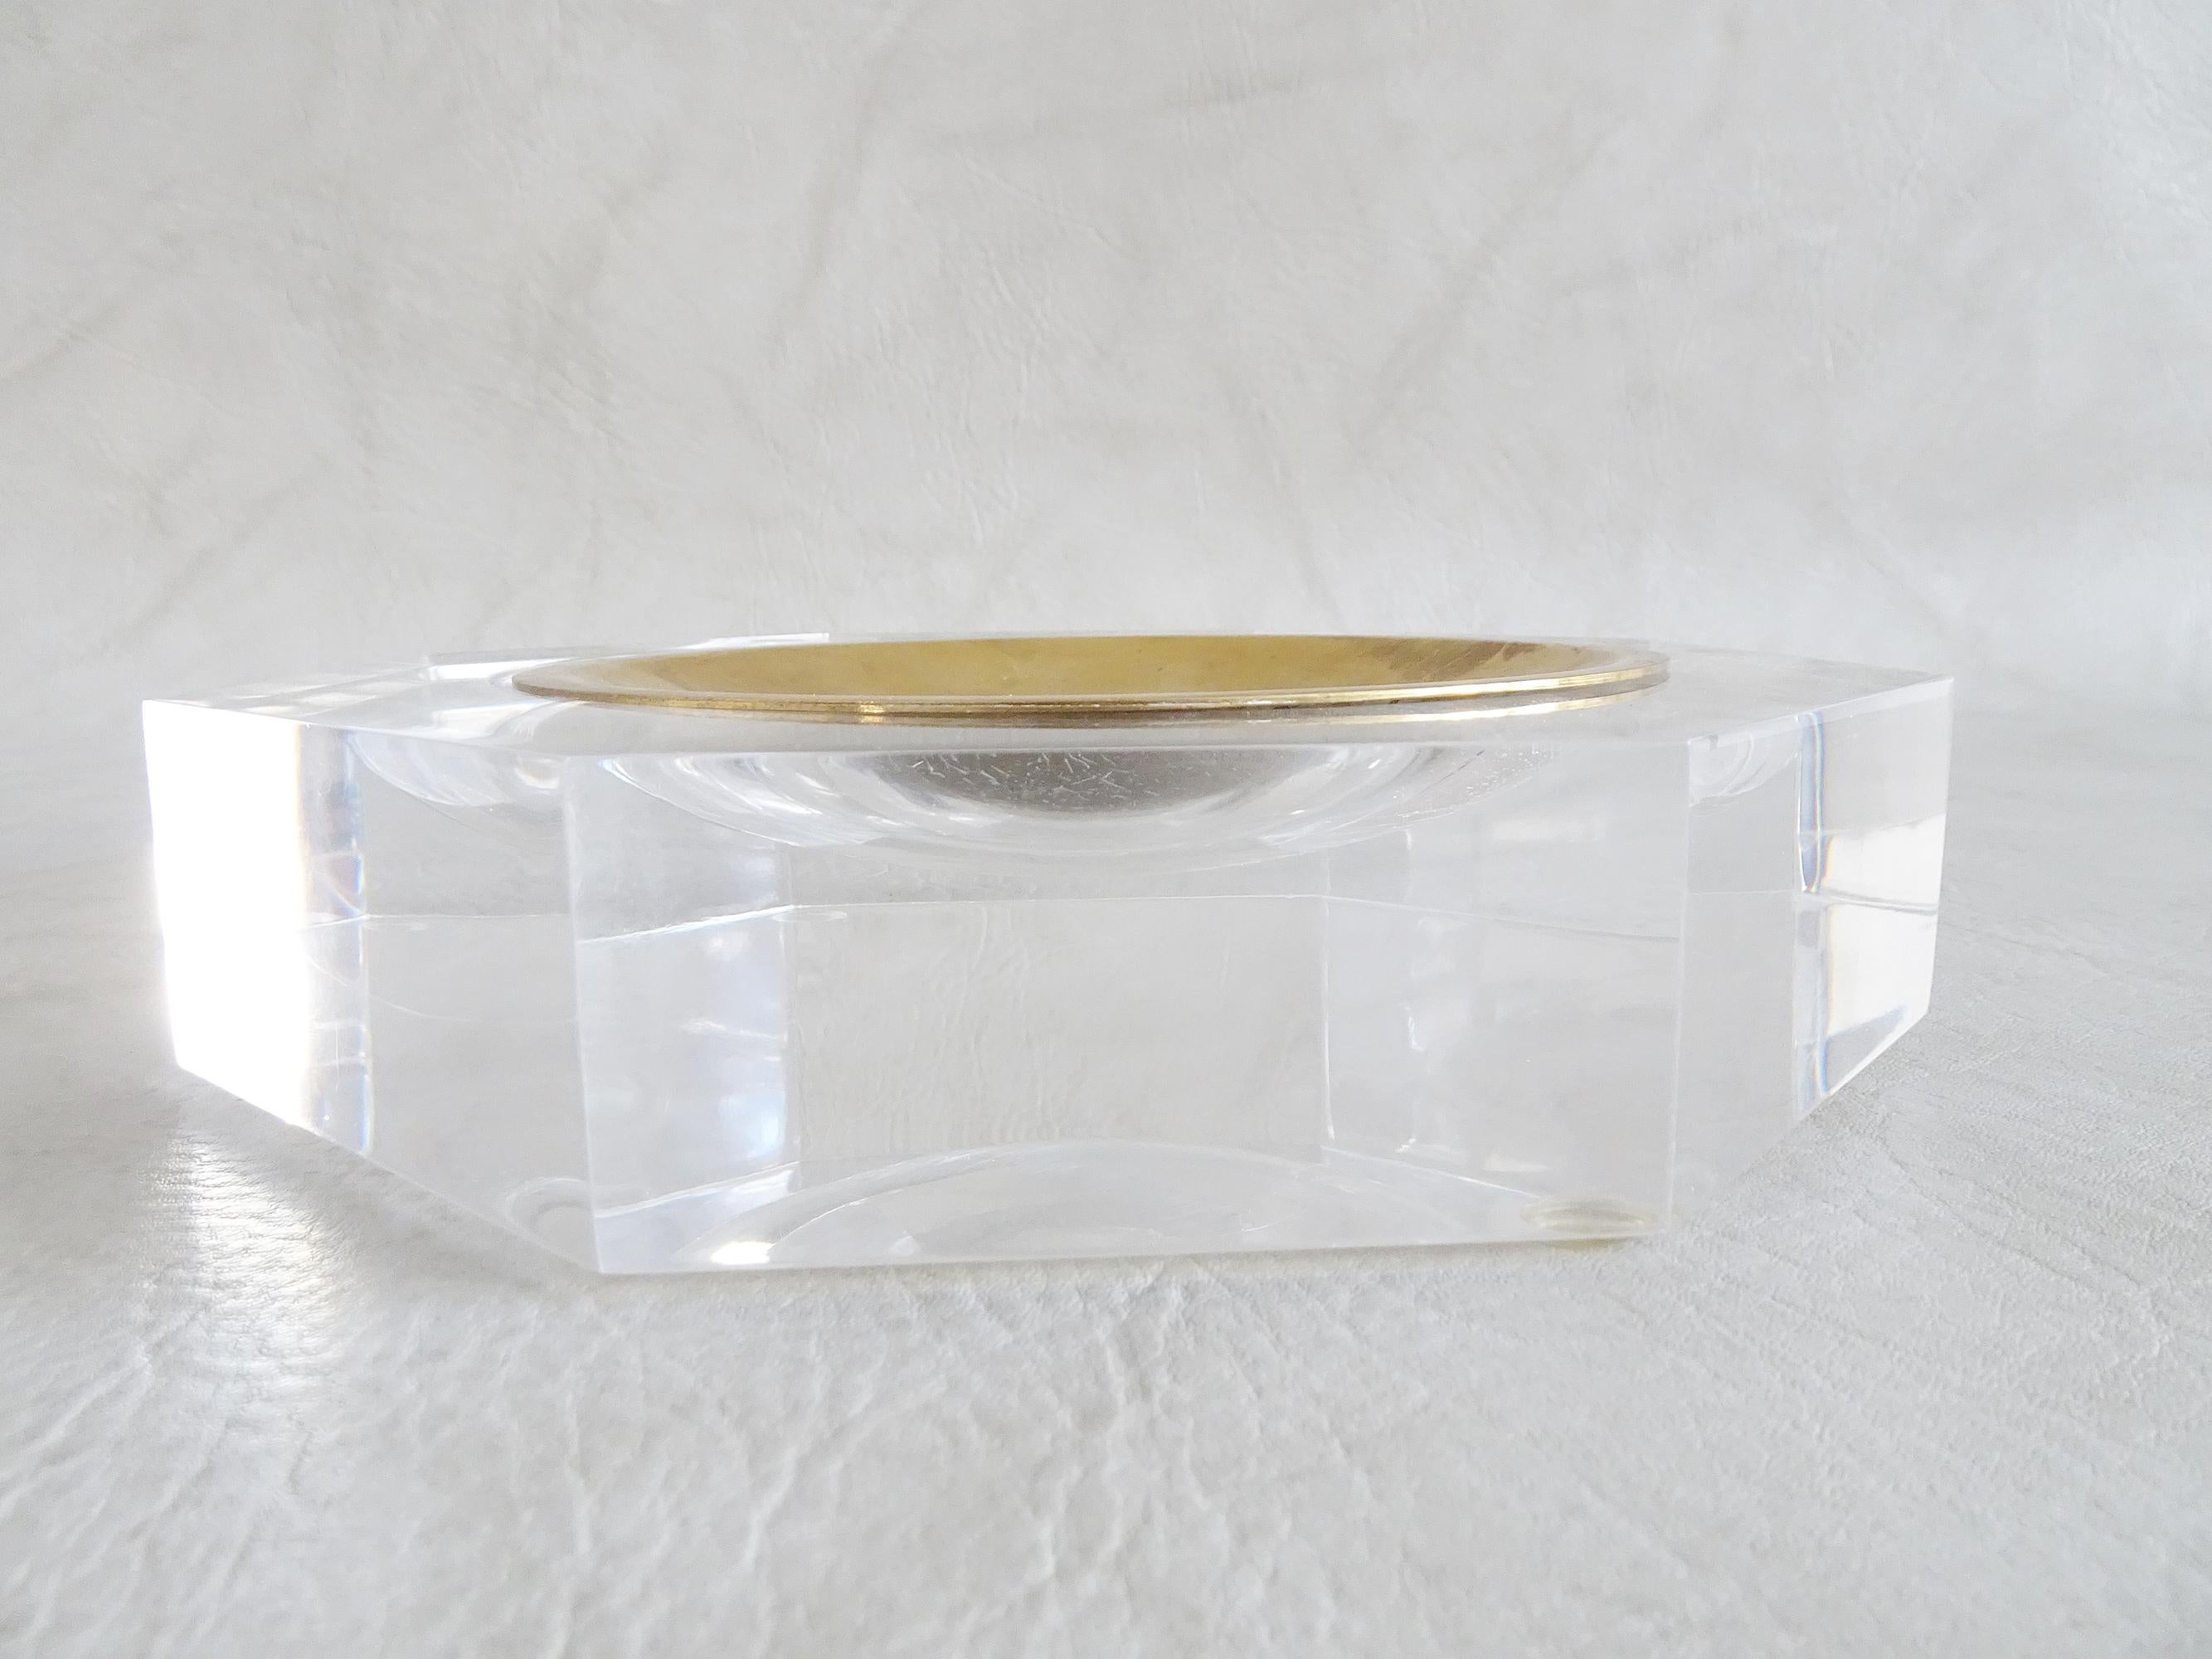 French Midcentury Bowl by Marc Micoud Acrylic Glass Lucite, Octagonal